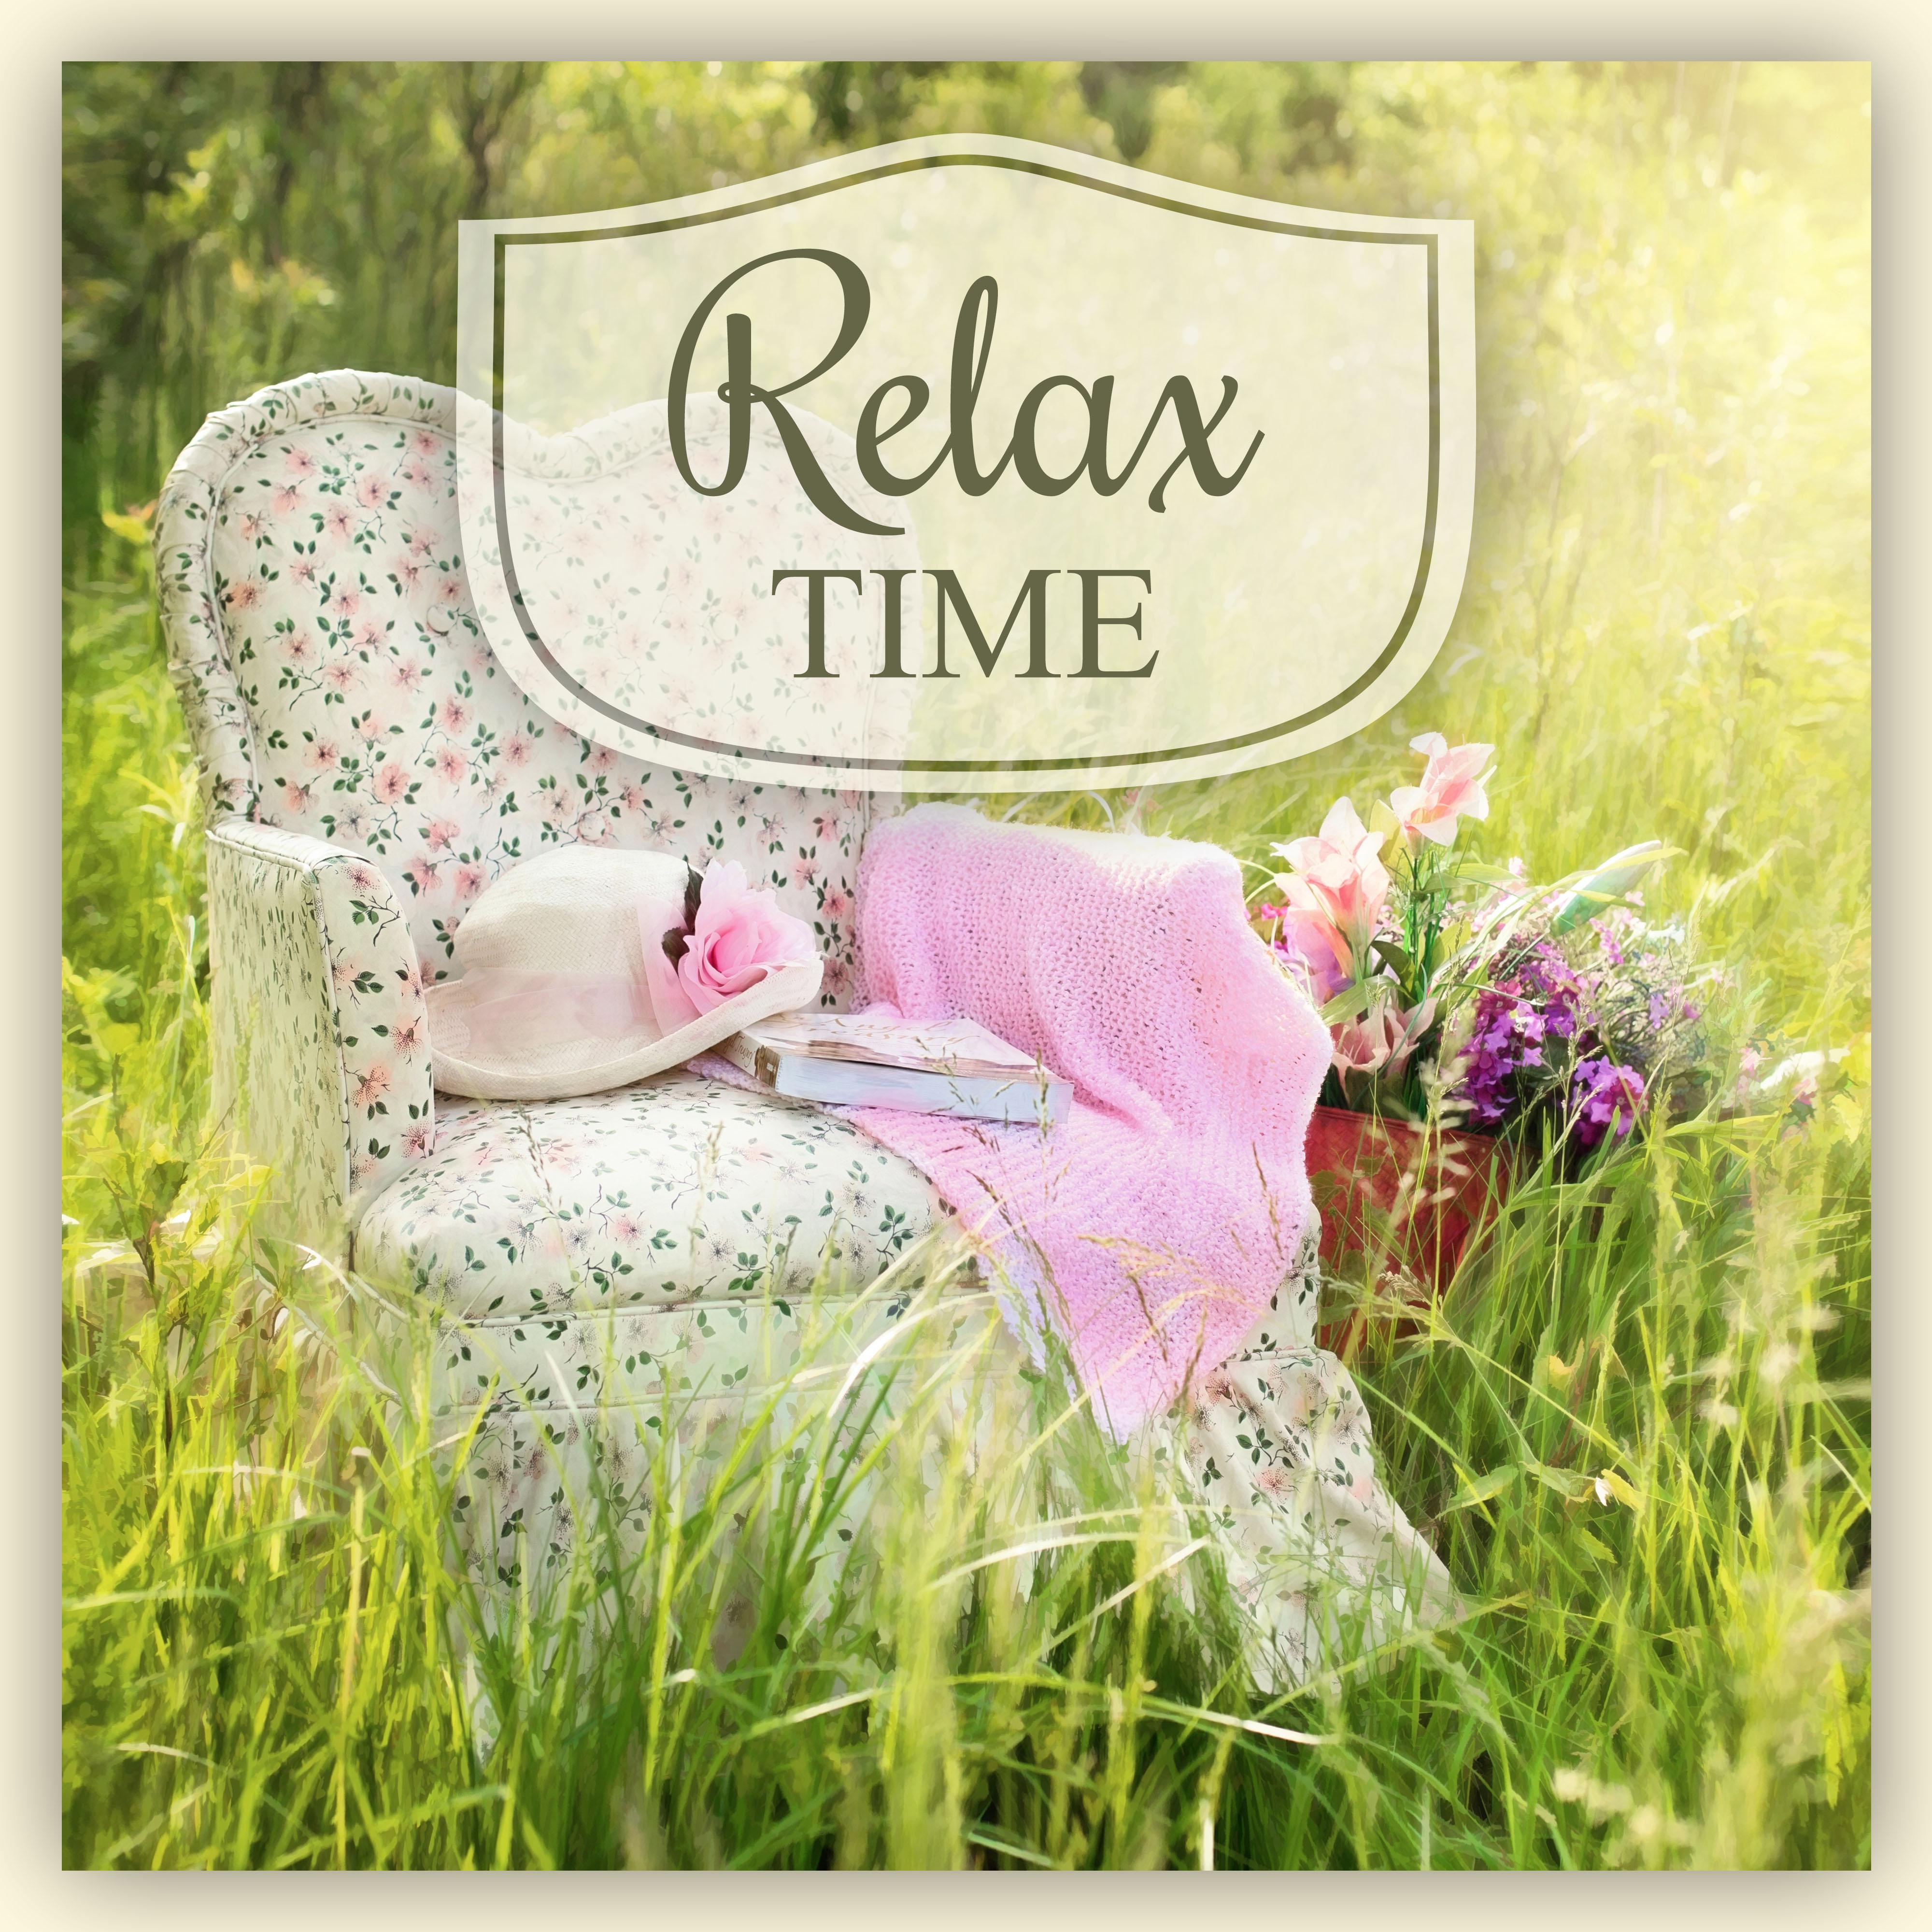 Relax Time – New Age Music for Time to Rest, Best Healing Music for Massage, Relaxing Therapy, Calming Music, Nature Sounds